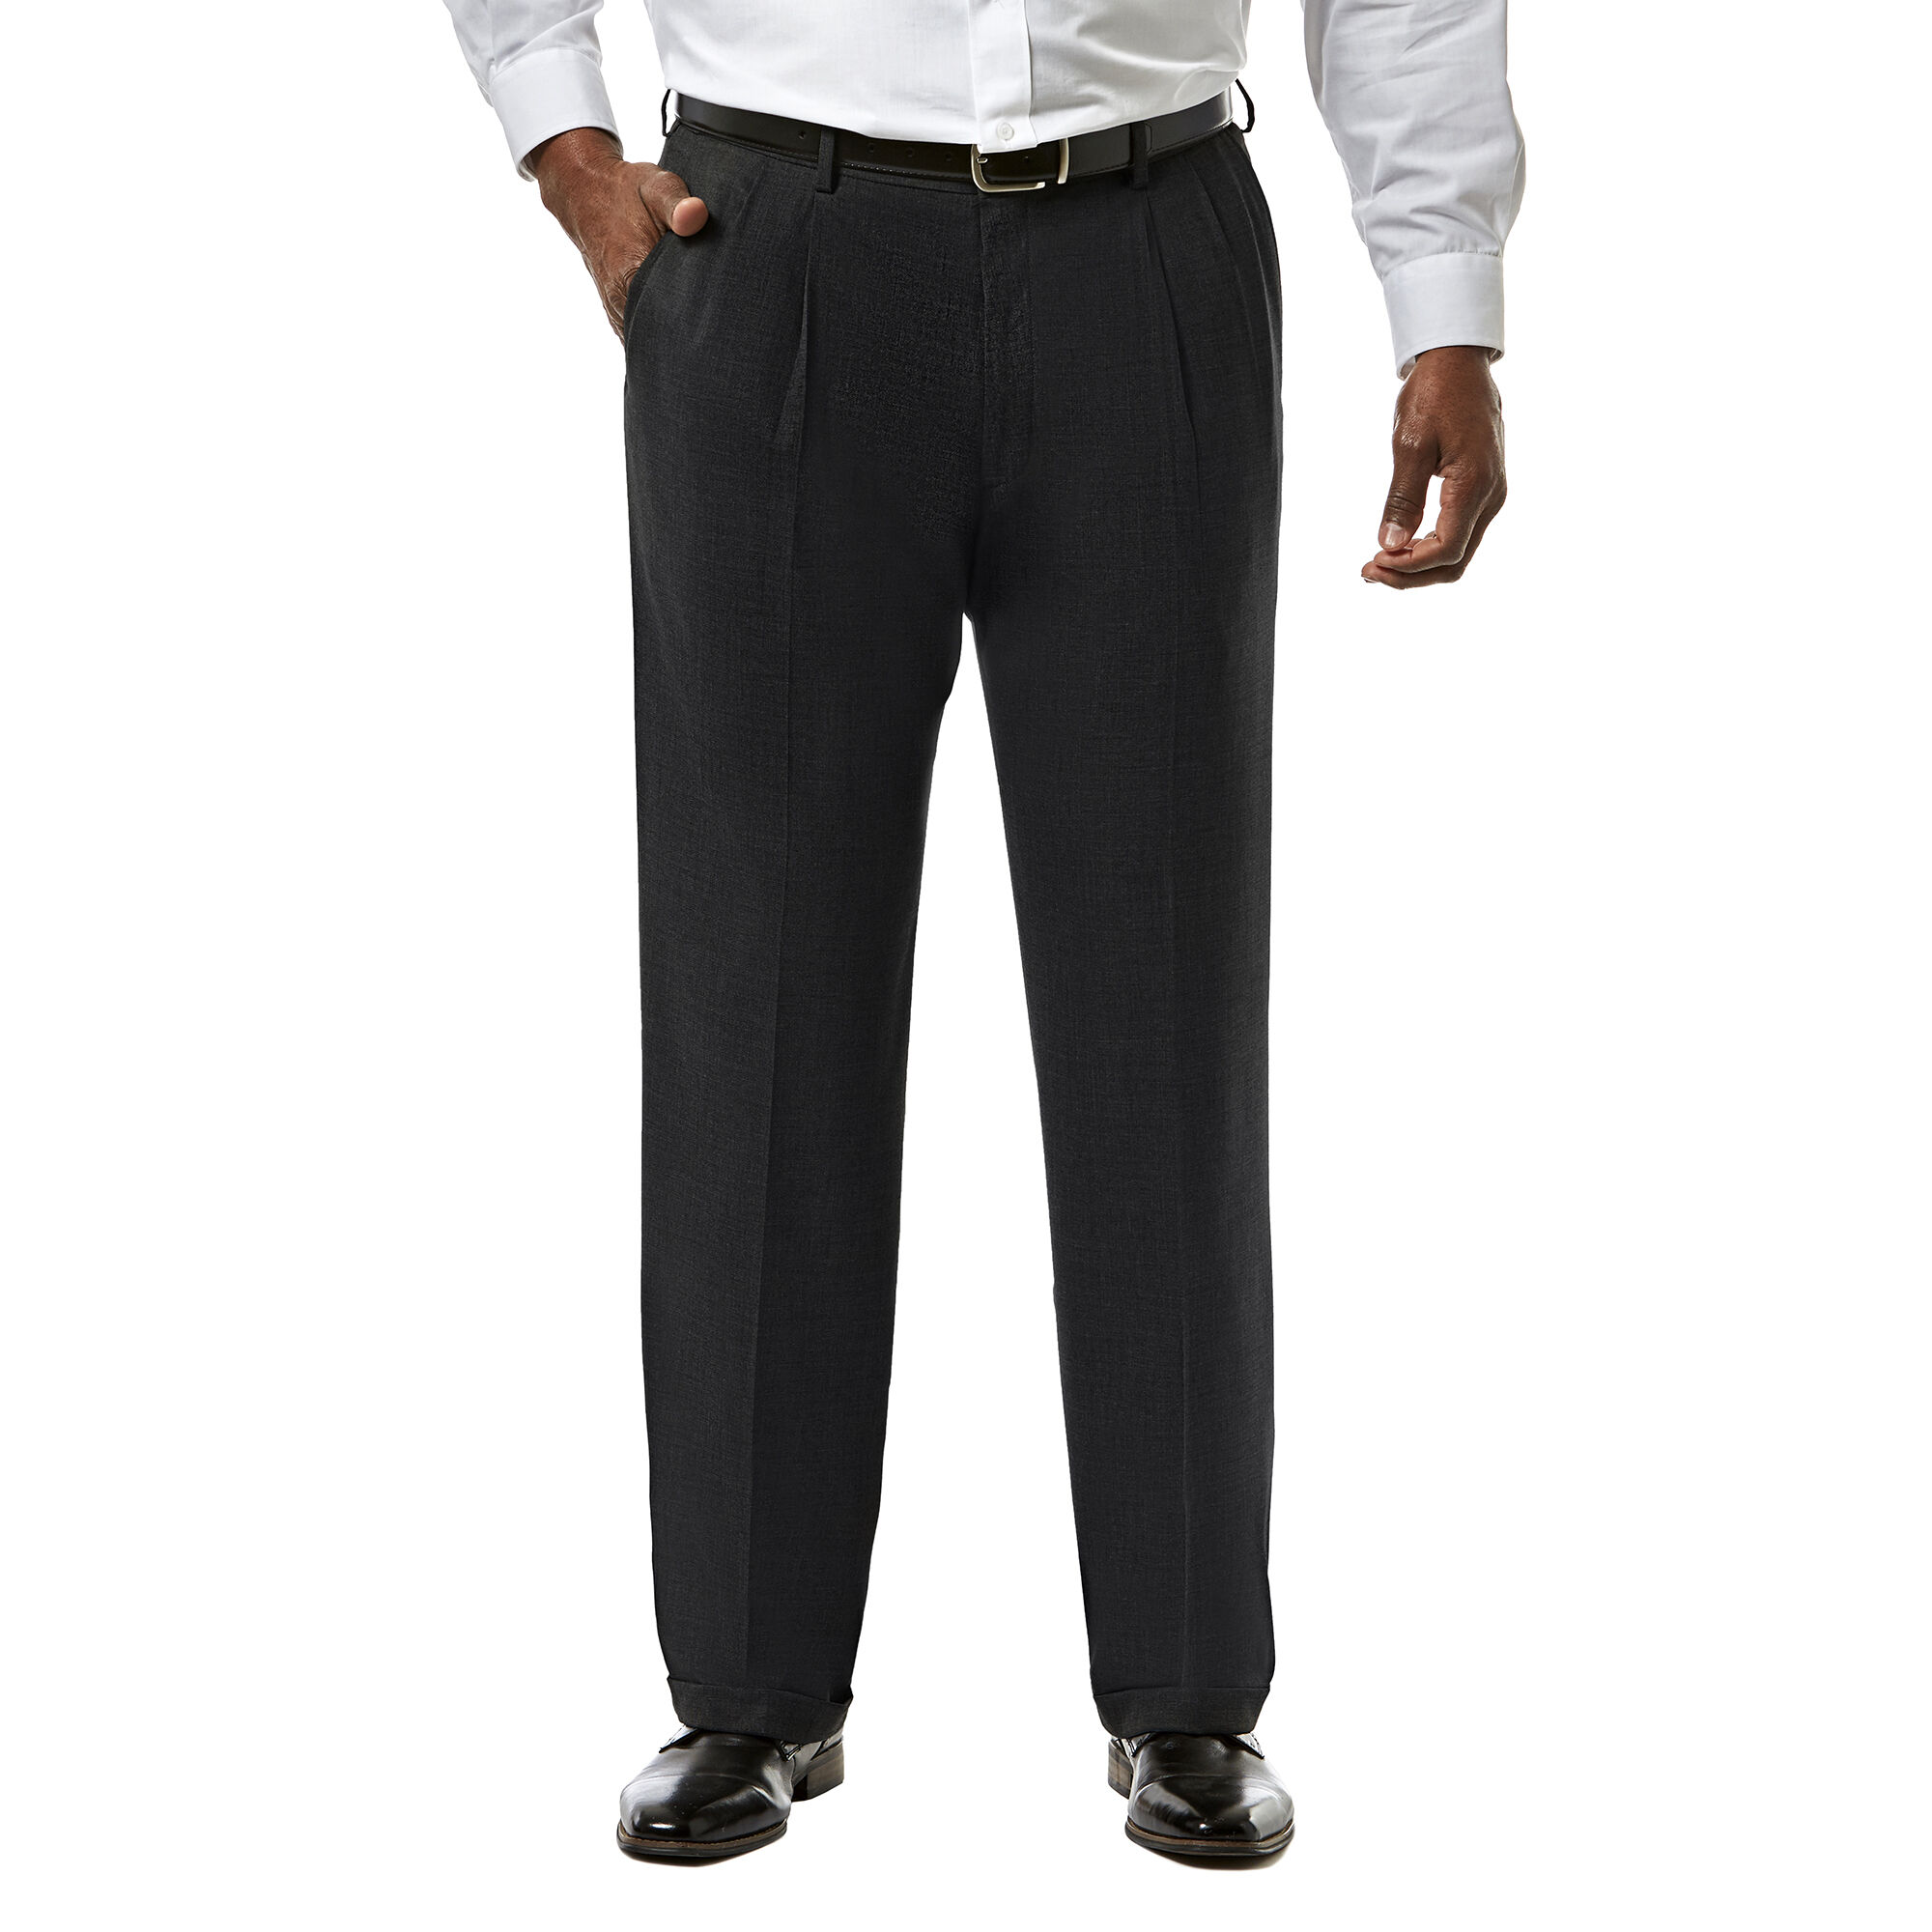 Big & Tall J.M. Haggar Premium Stretch Suit Pant - Pleated Front Black Big & Tall Classic Fit Pleated Front Hidden Expandable Waistband: Expands up to 3" 64% Polyester, 34% Viscoe Rayon 2% Spandex Dry Clean Only Imported Style #: HY91182 Size - M